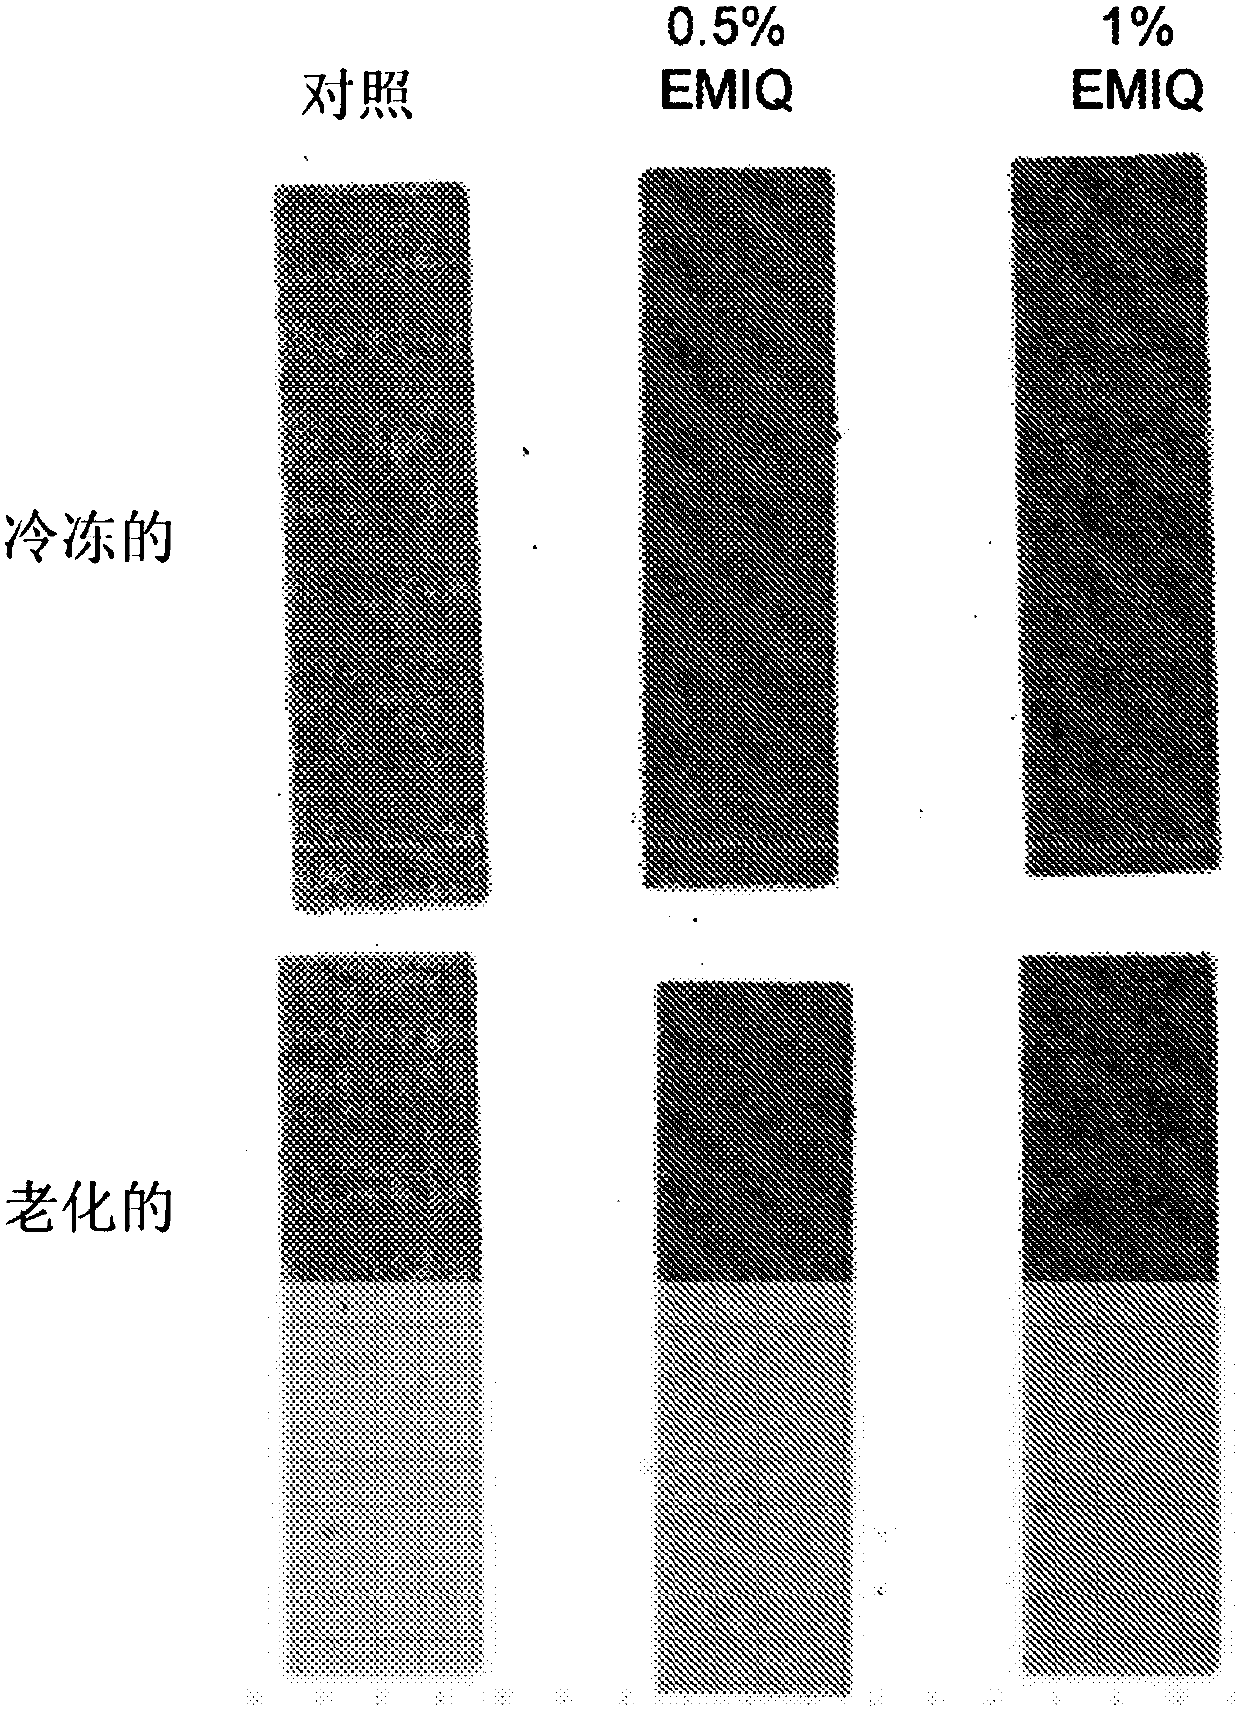 Edible compositions containing stabilized natural colorants